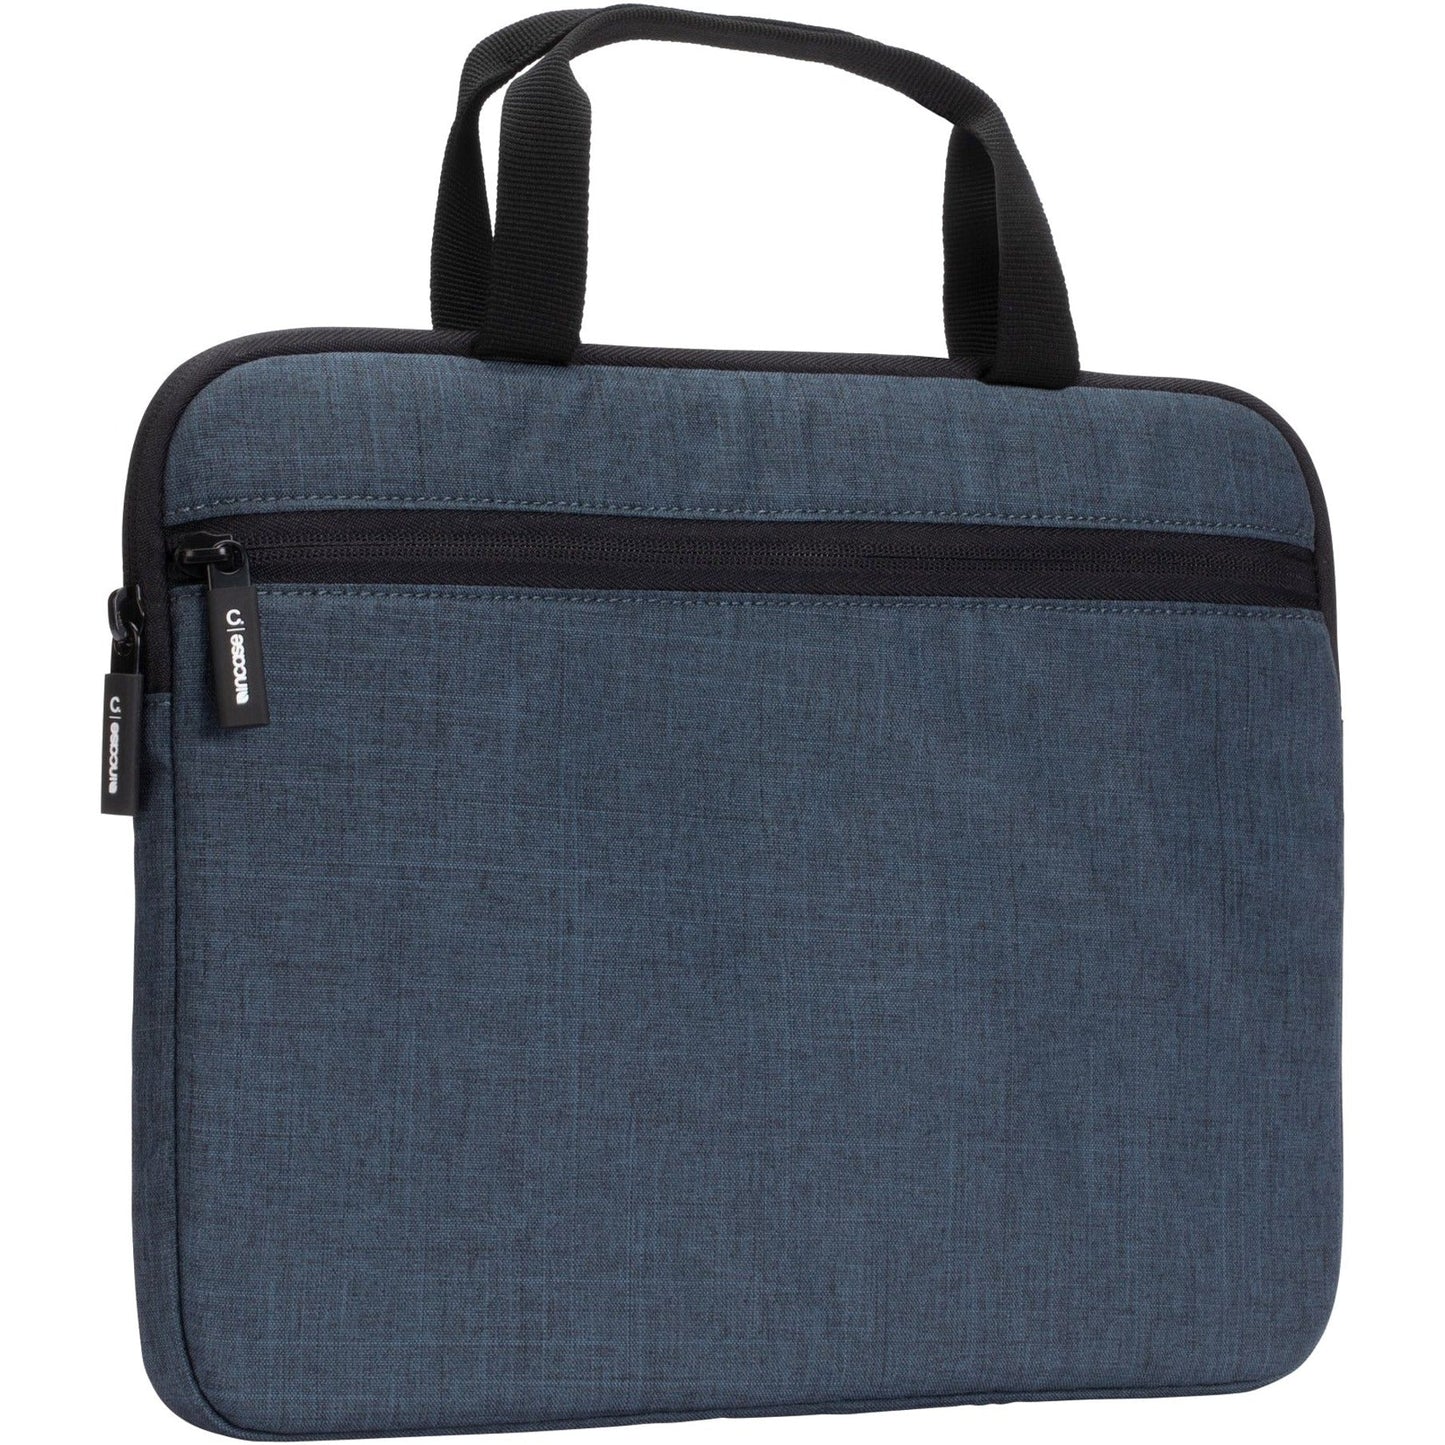 Incase Carrying Case (Briefcase) for 13" Notebook - Blue